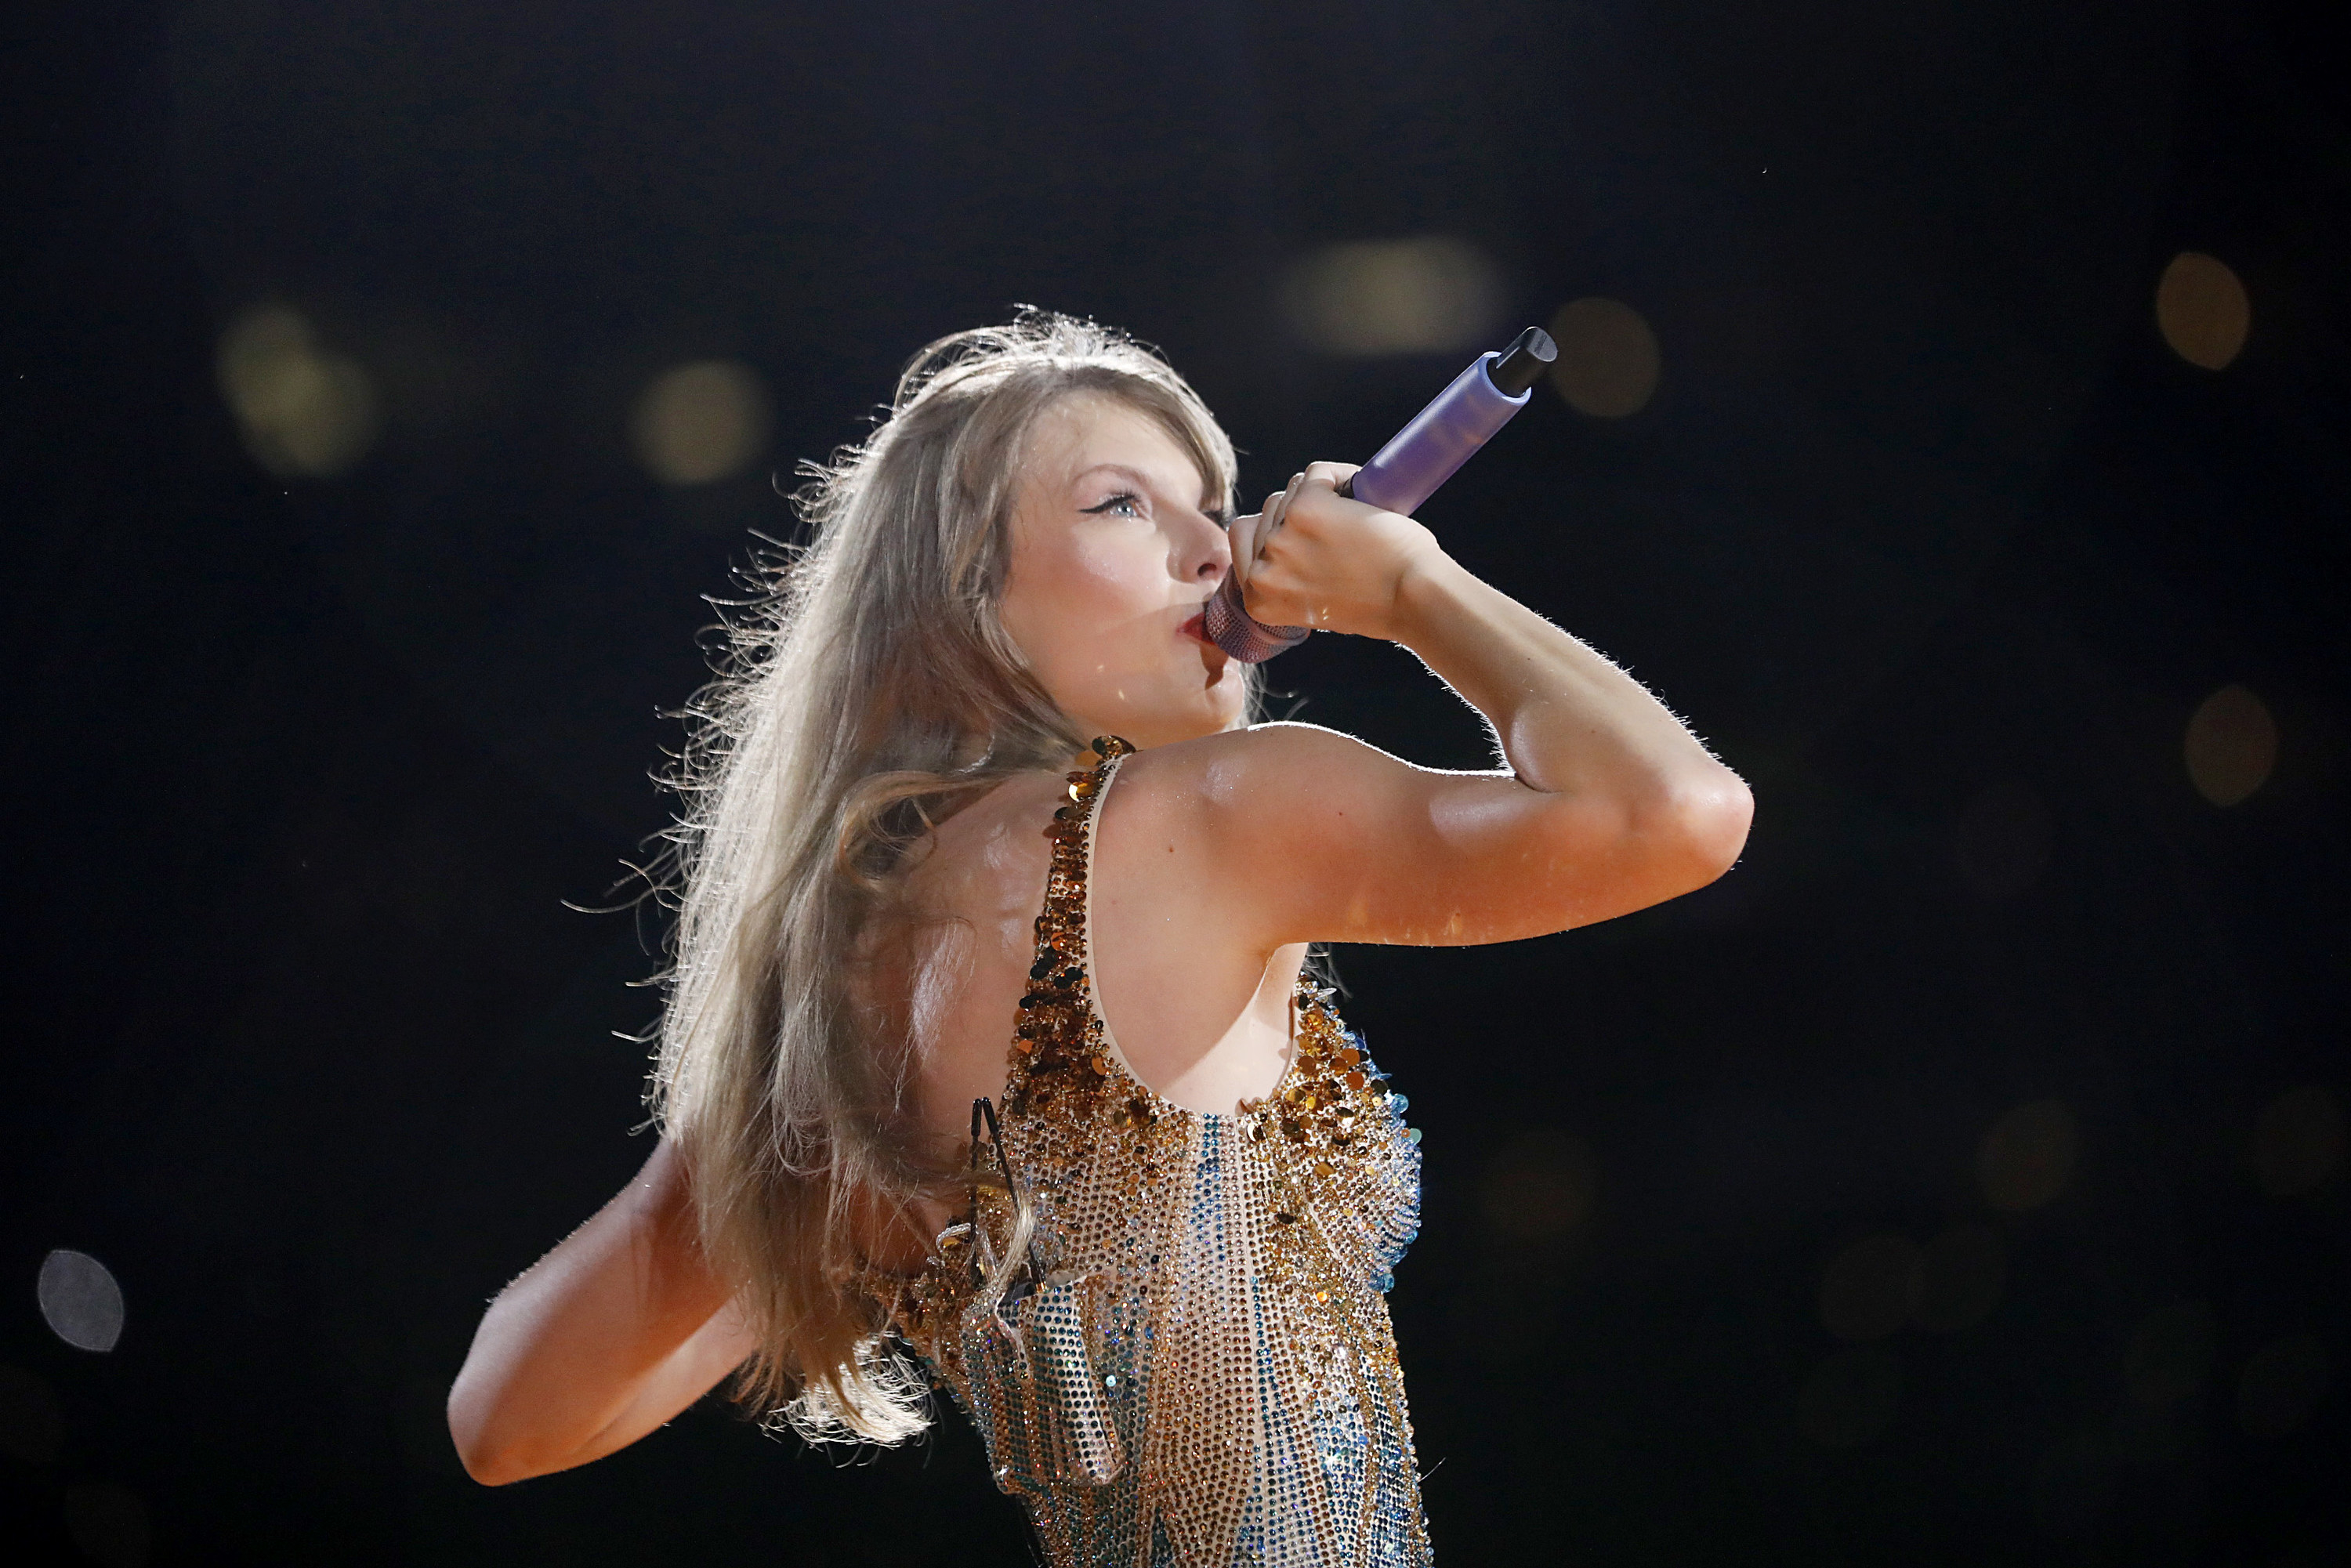 Close-up of Taylor performing onstage